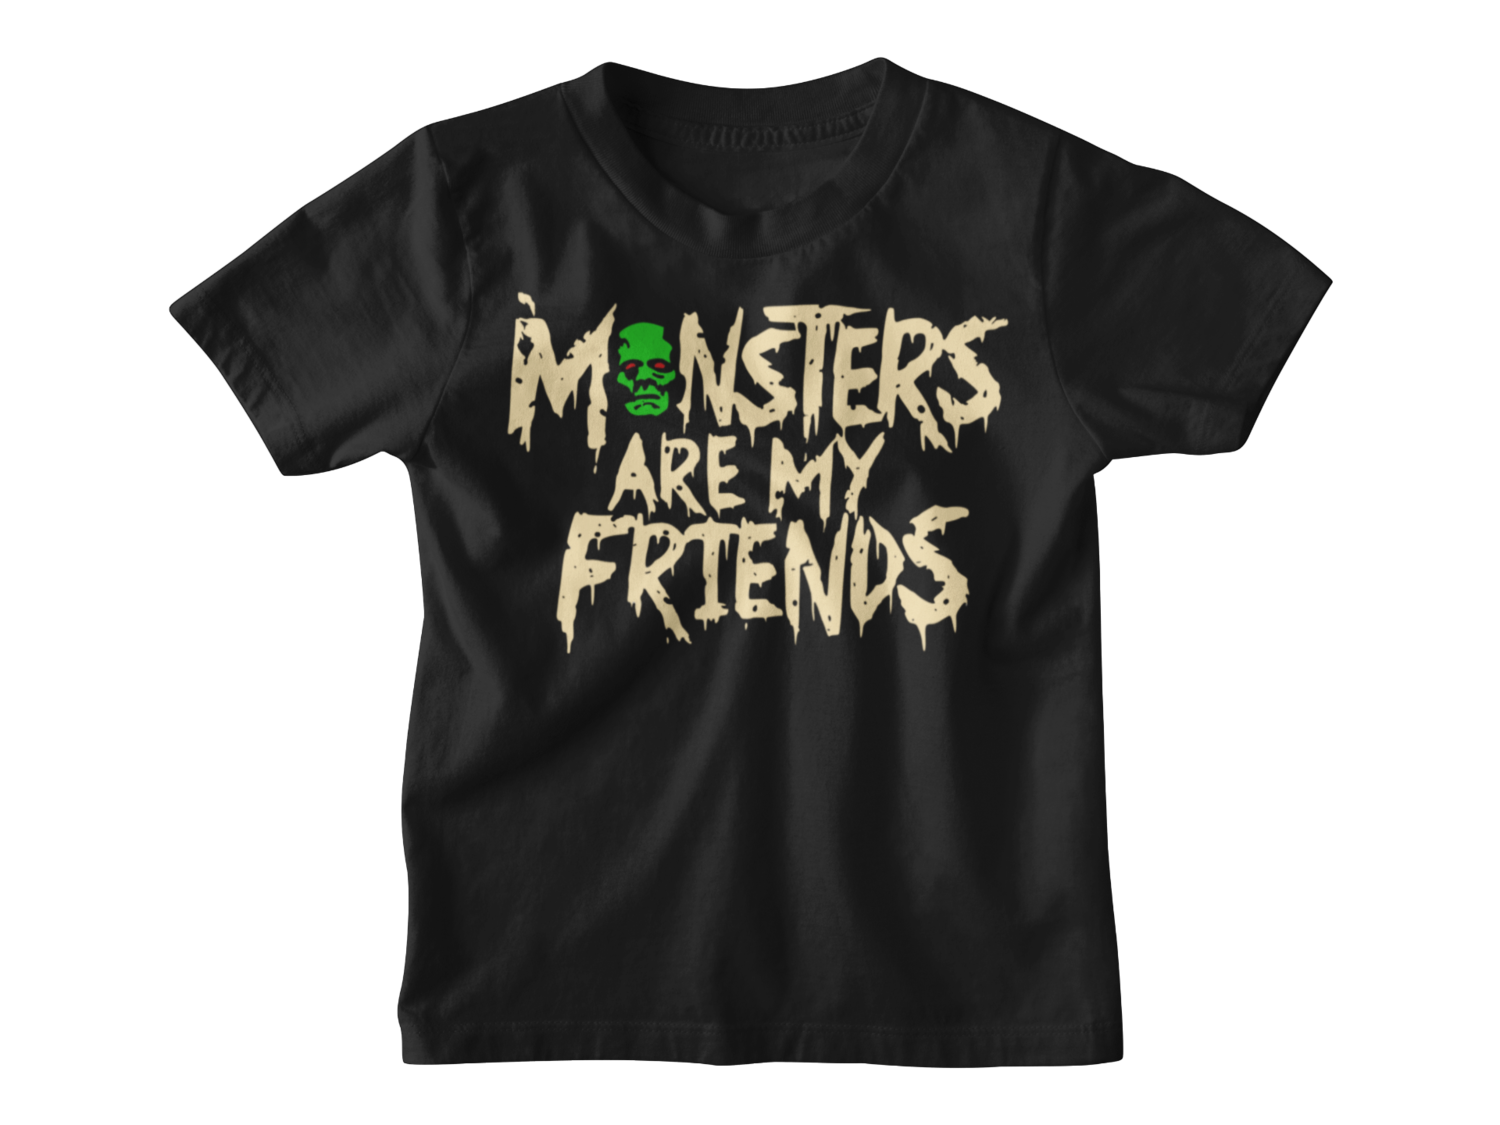 MONSTERS ARE MY FRIENDS T-SHIRT KIDS